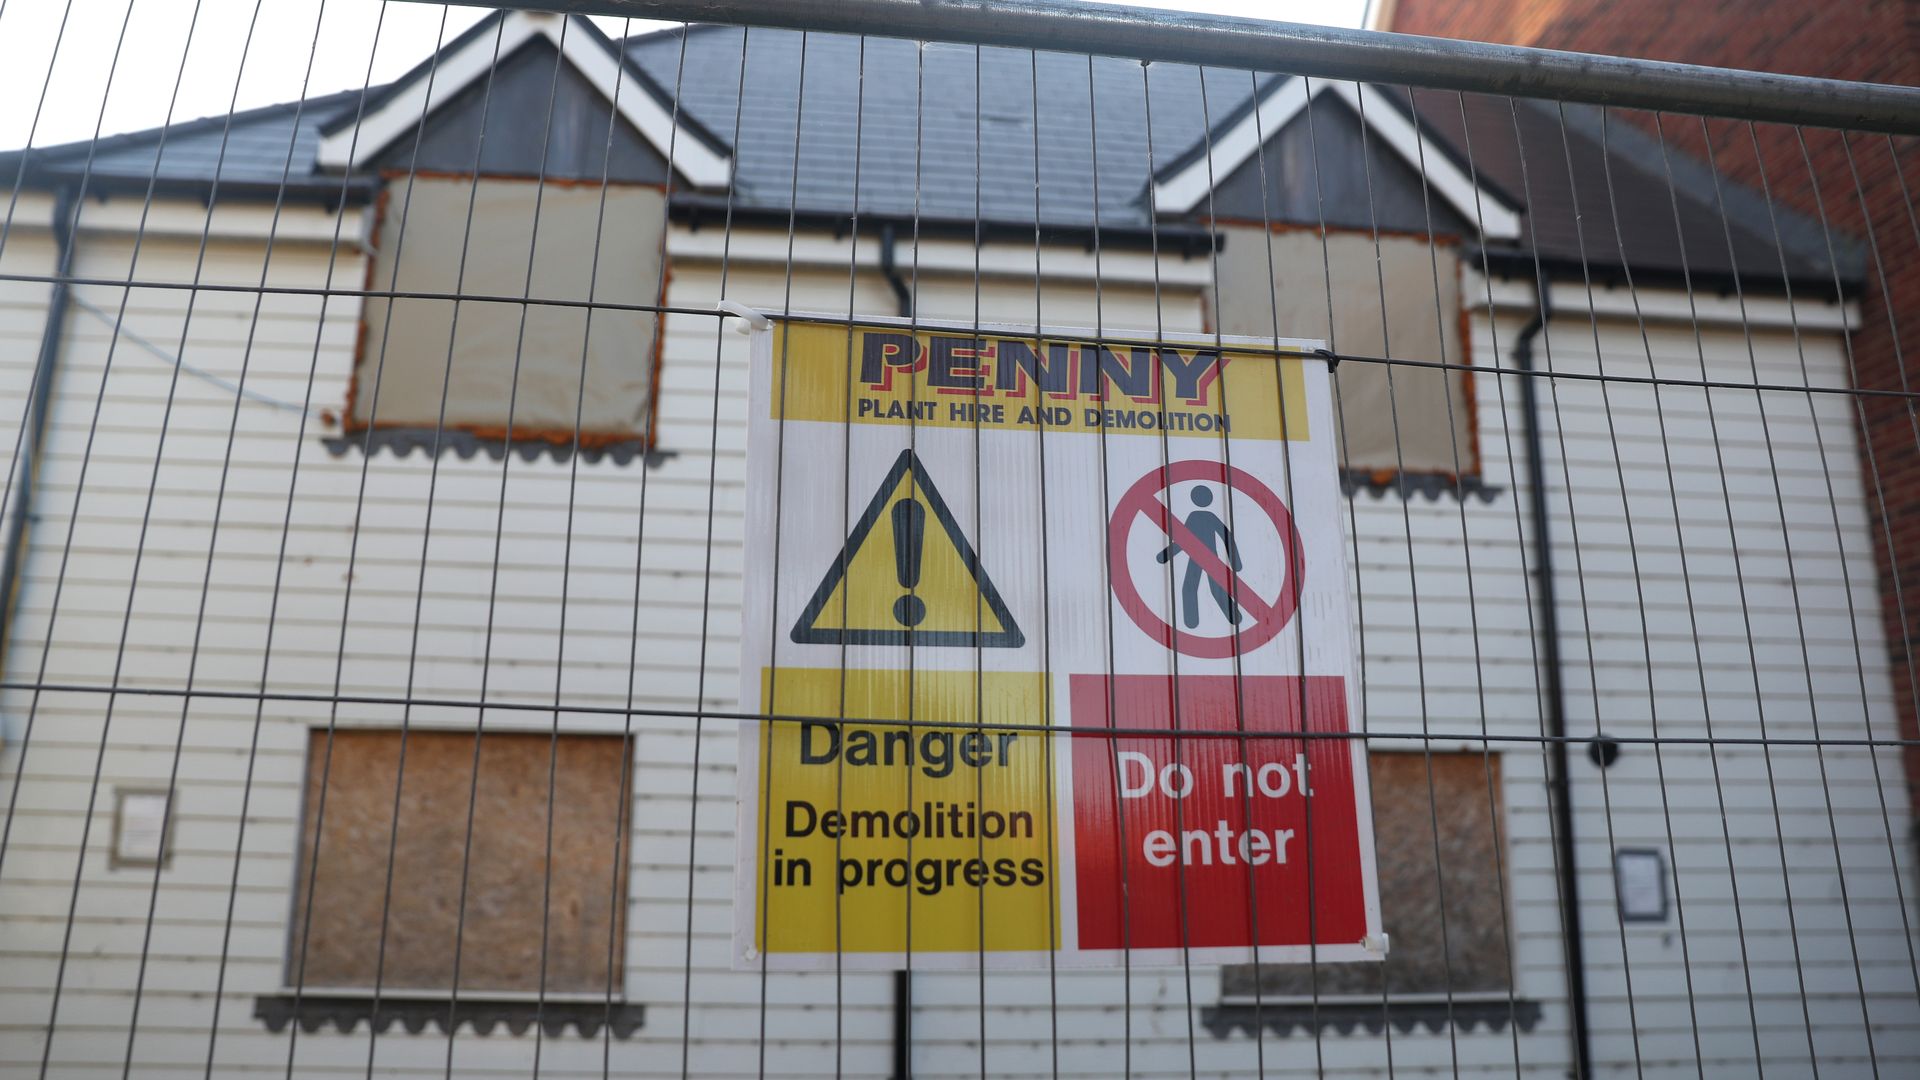 The former home of Charlie Rowley, Dawn Sturgess's husband, set for demolition after the couple was exposed to Novichok at the property in June 2018.